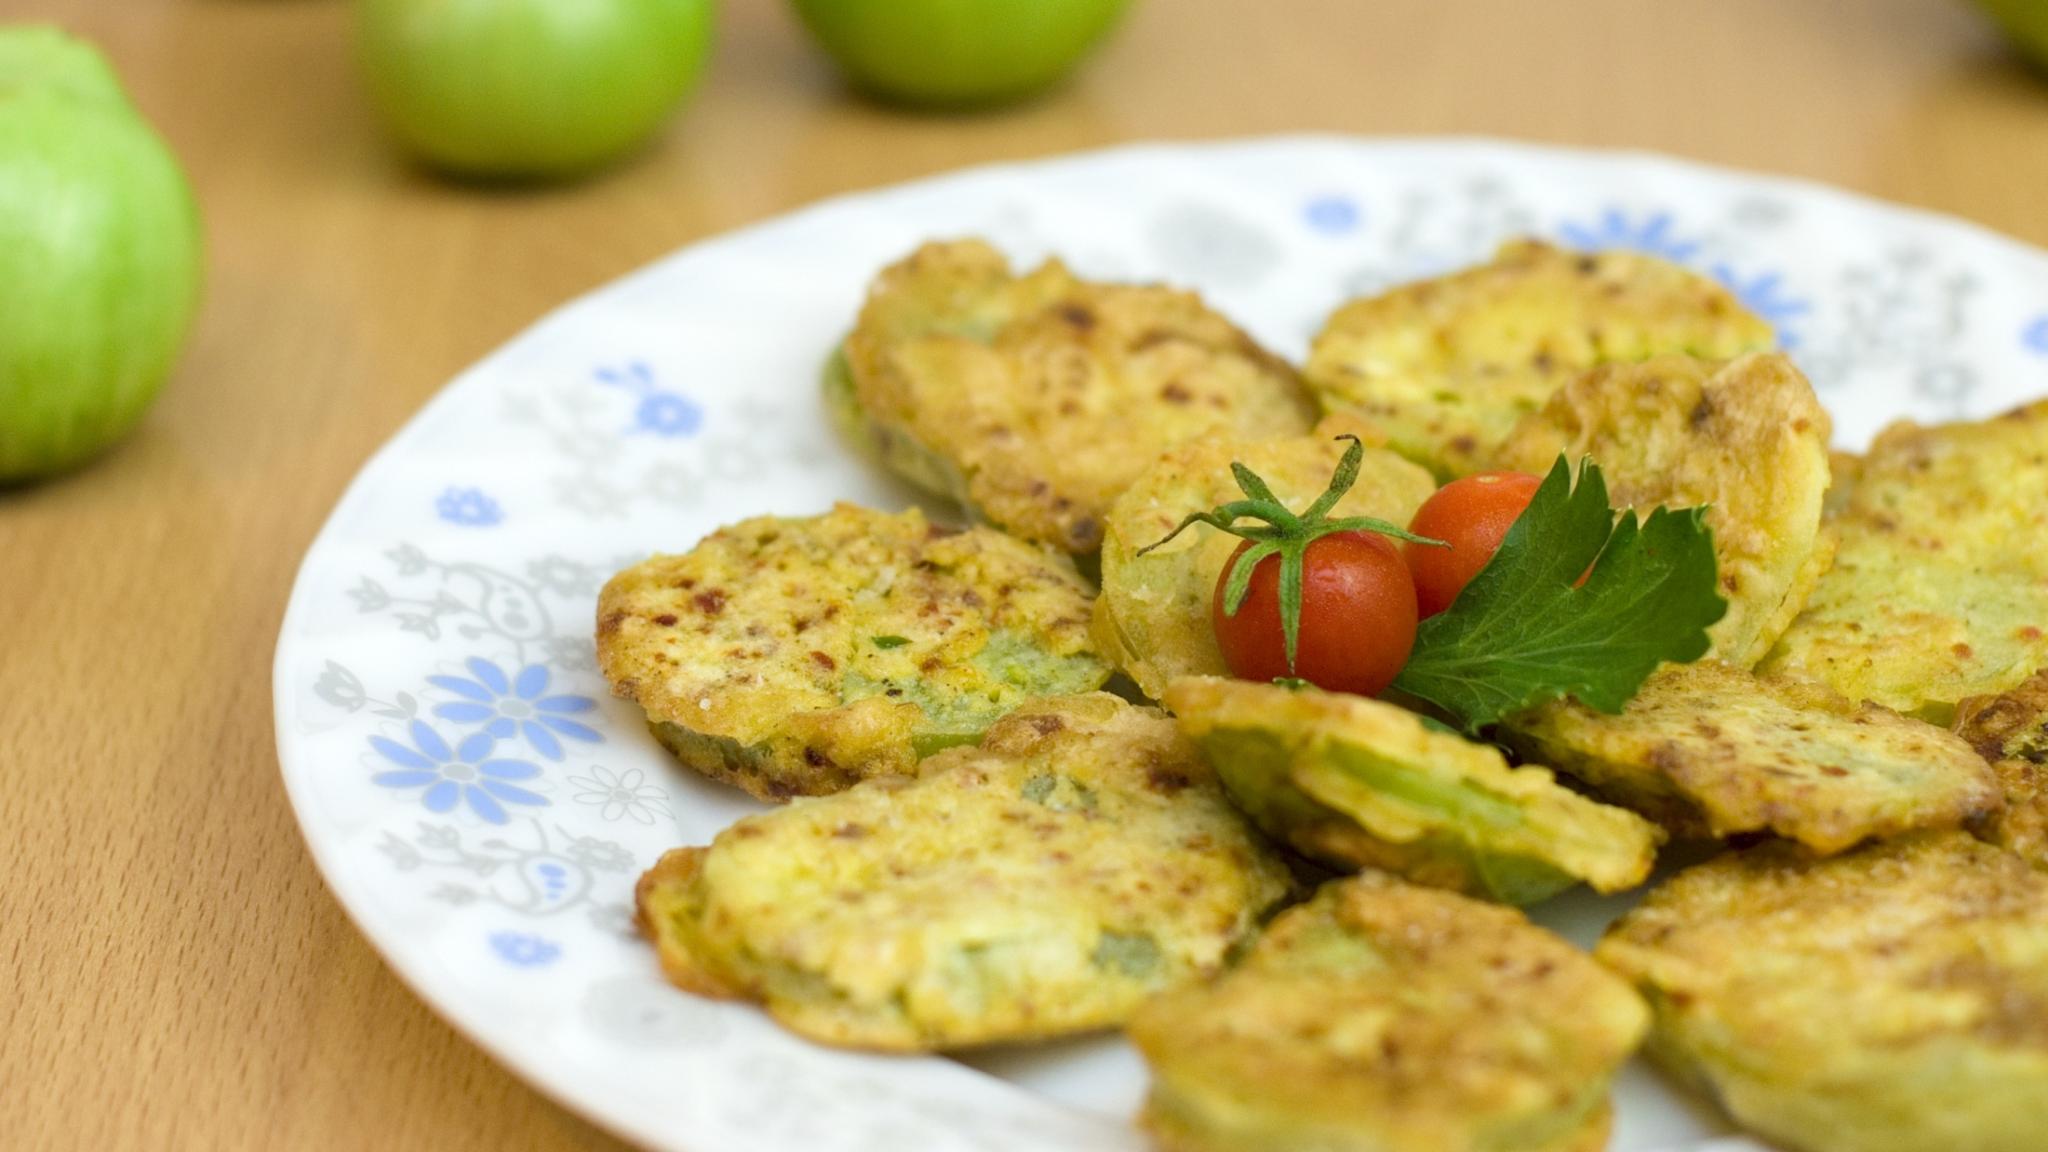  Fried Green Tomatoes on a plate